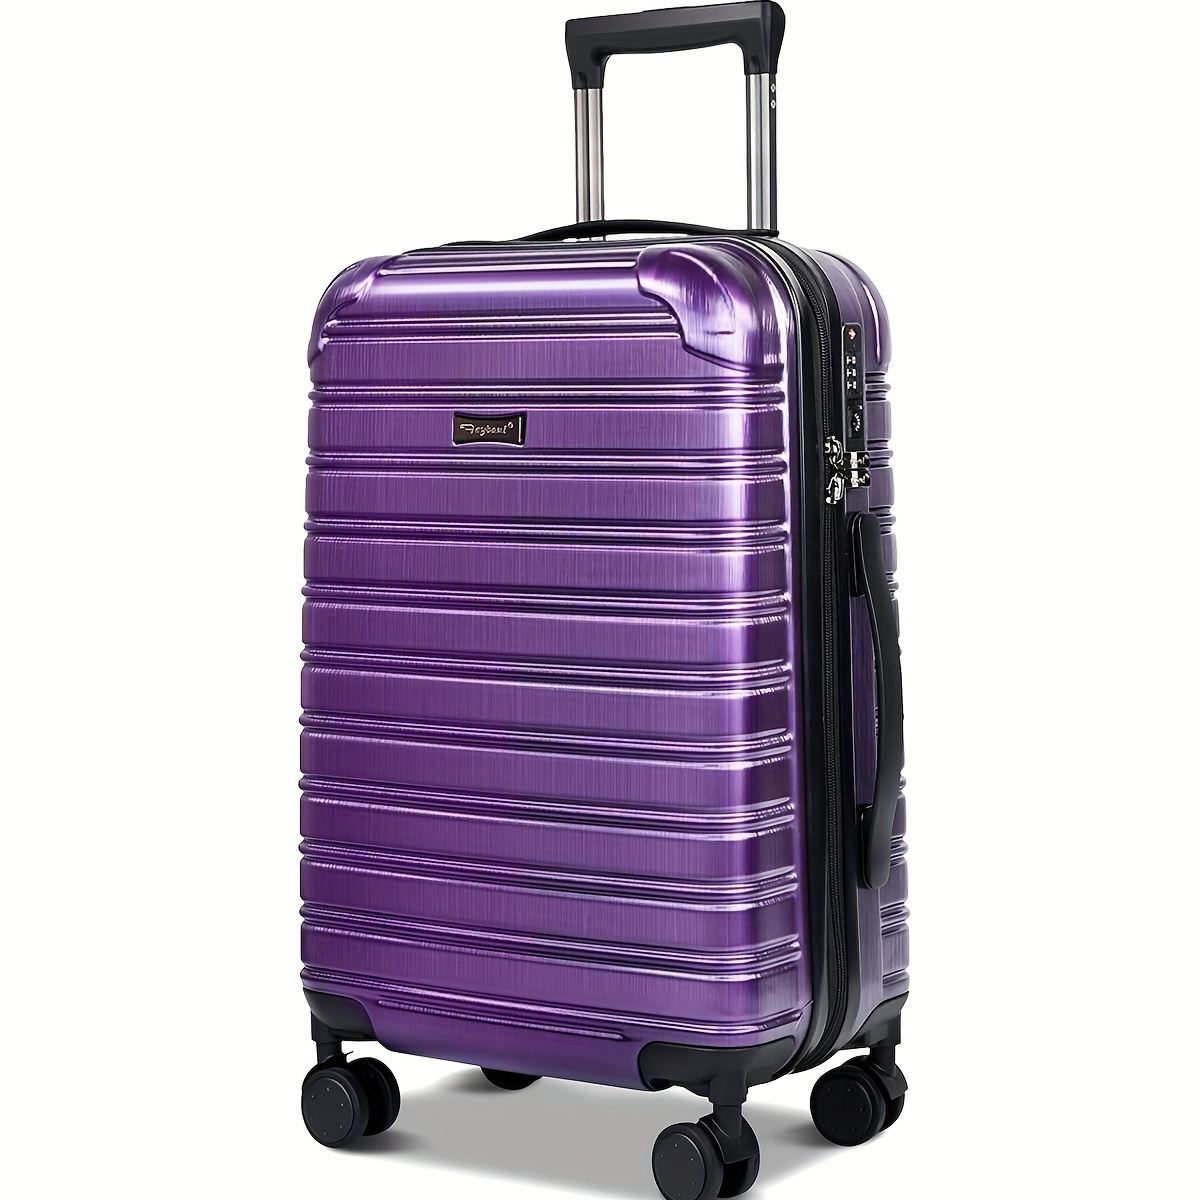 

Striped Abs+pc Luggage Suitcase, Carry On Lightweight Trolley Case With Tsa Lock, Universal Wheel Travel Case 20/24/28inch